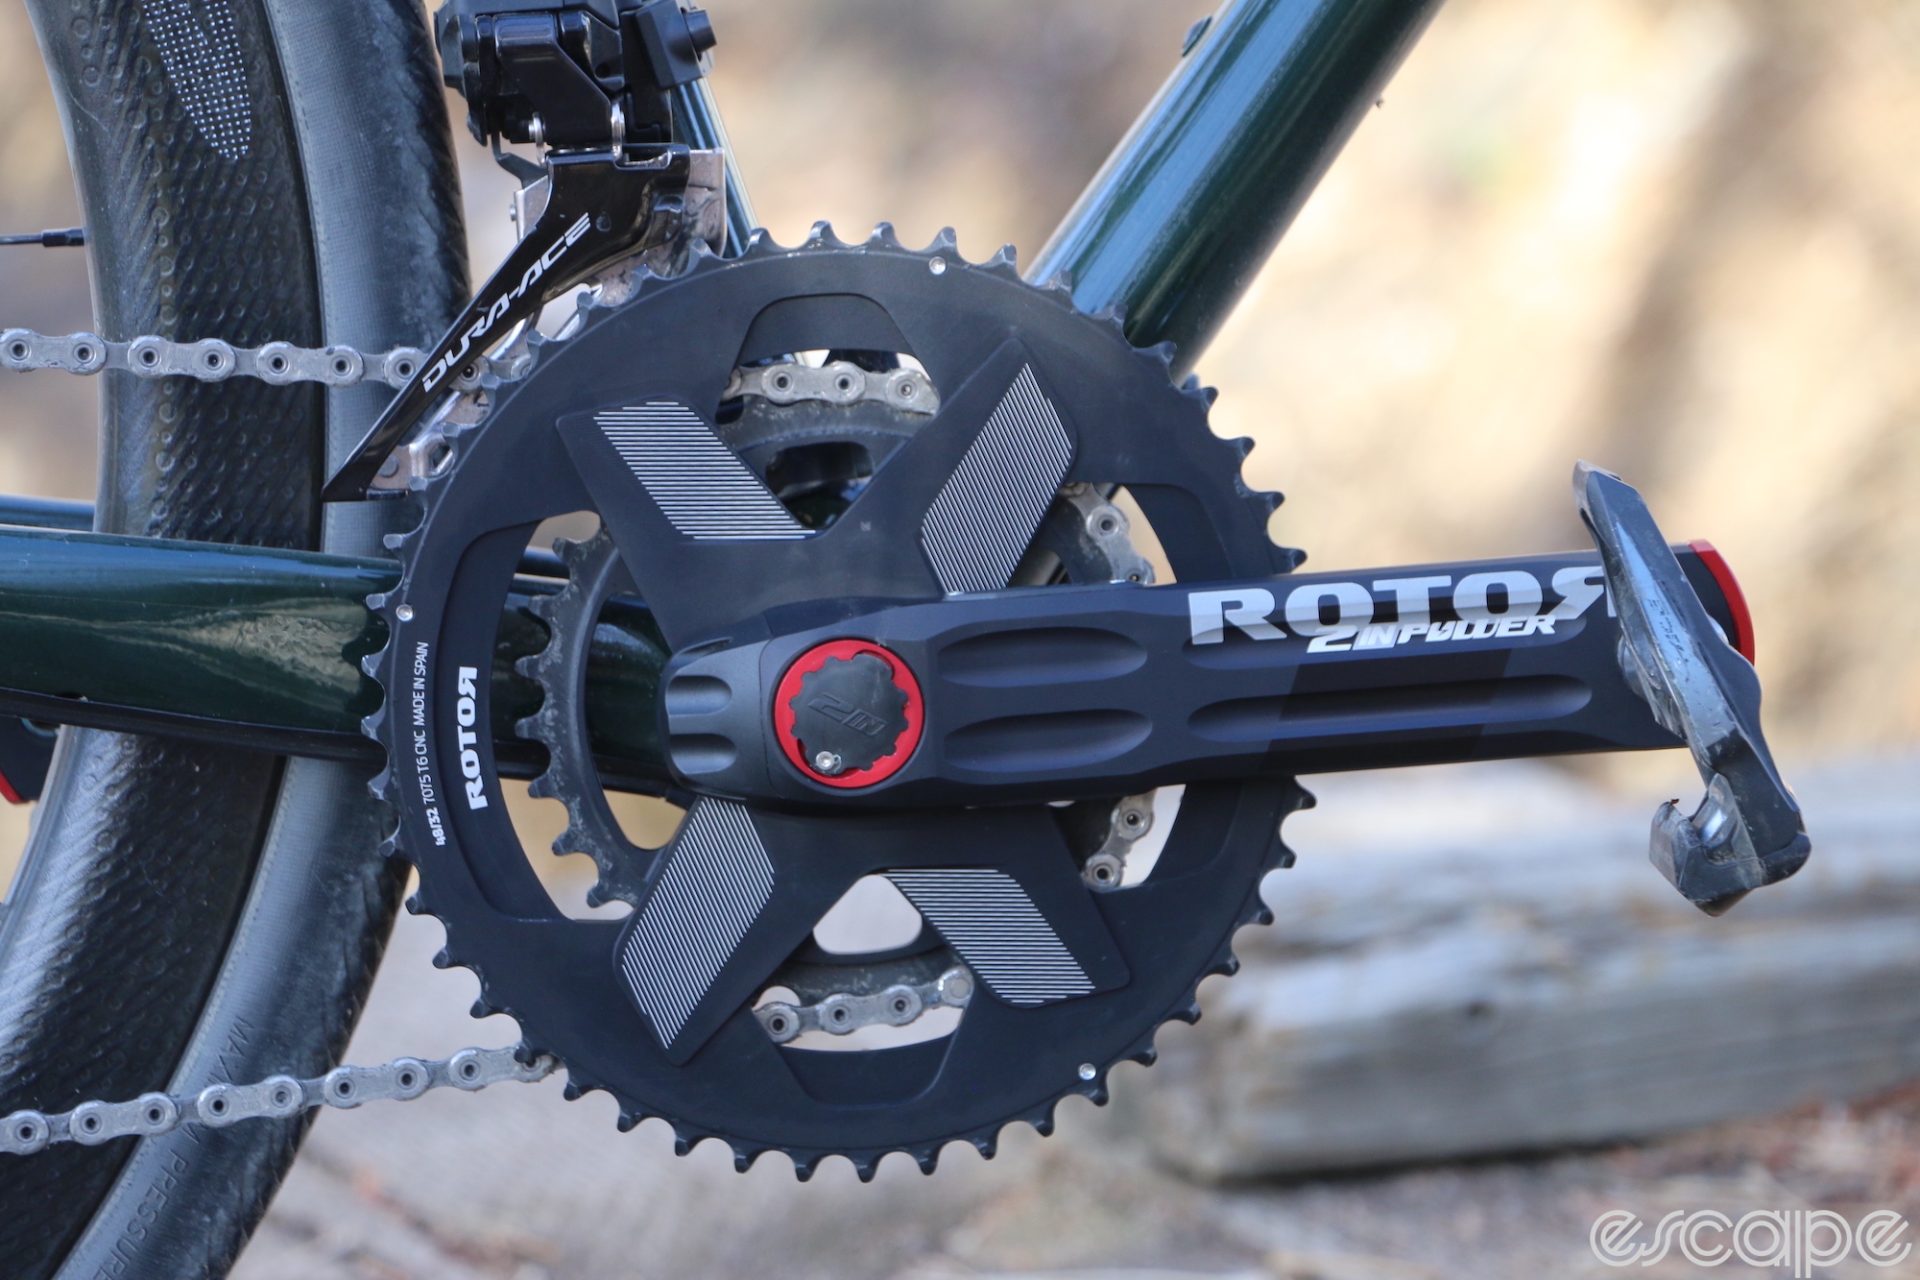 Rotor's 2InPower driveside crankarm, shown on a bike. The arm is level and the black arm features red accents at the bottom bracket and end of the arm. The chainrings are on an X-shape spider.